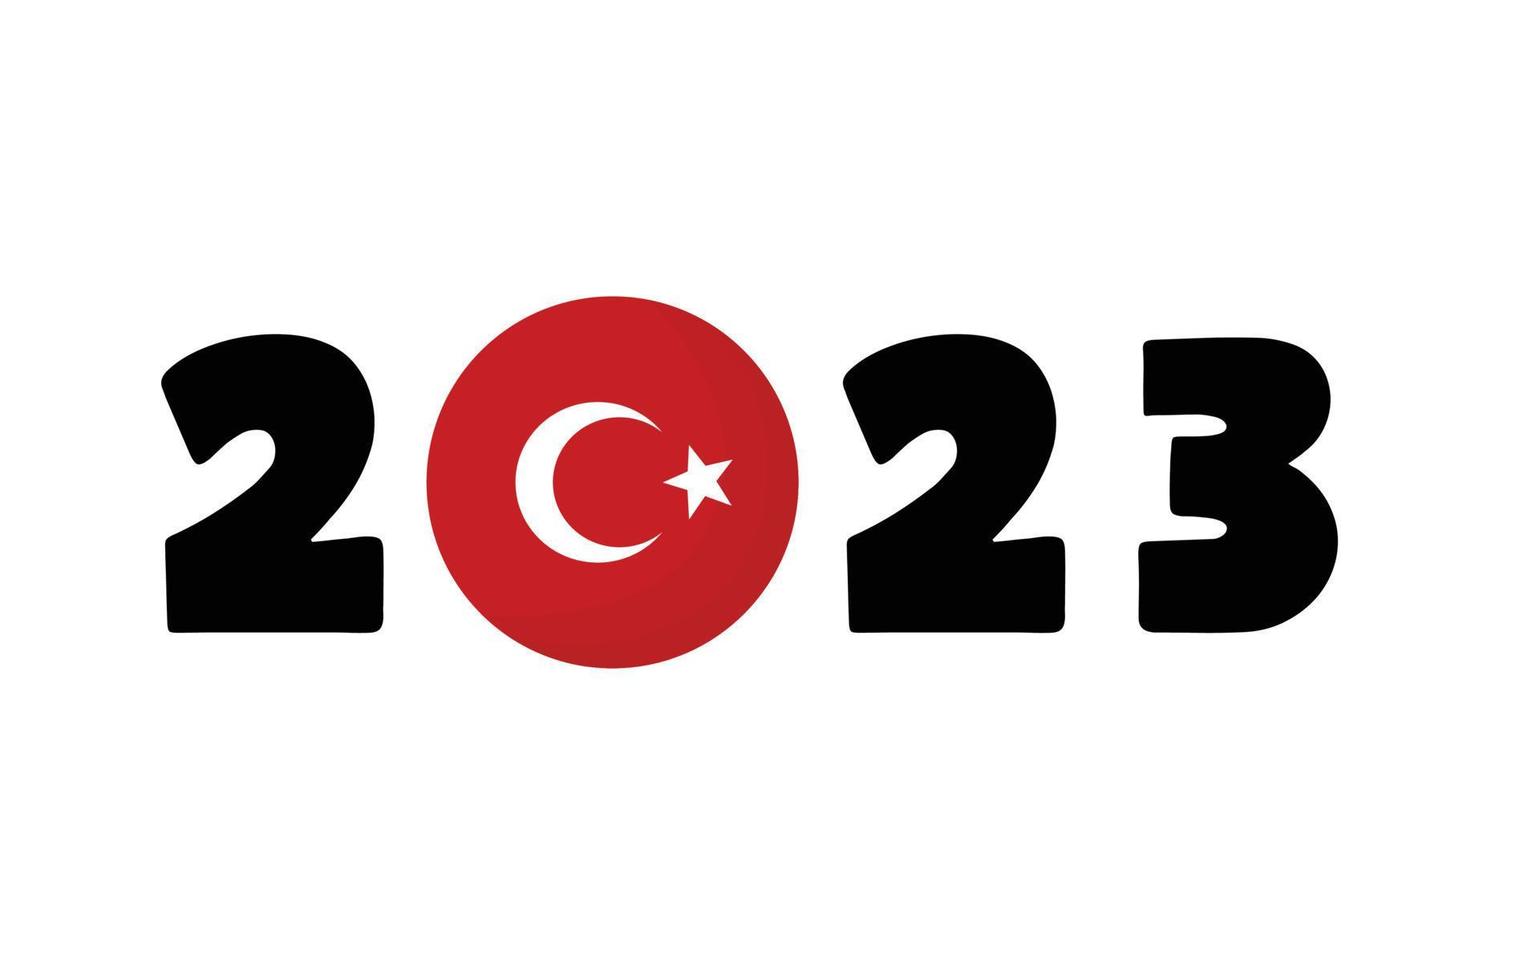 2023 Turkey government president elections and national holiday concept illustration. Turkish flag 2023. vector